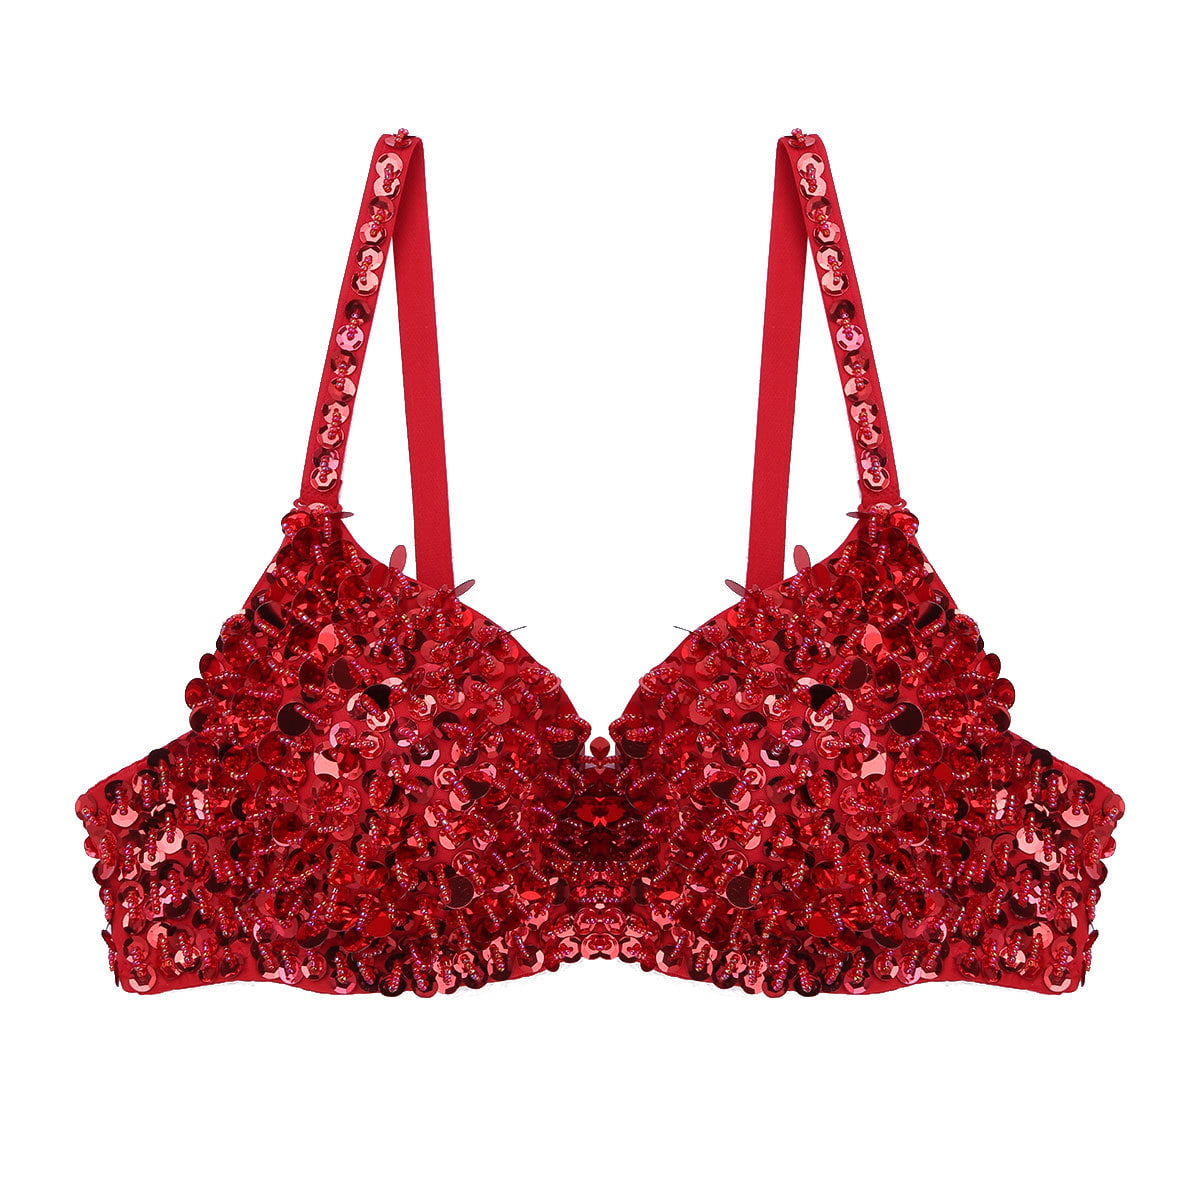 Shyle 36C Red Push Up Bra in Palghar - Dealers, Manufacturers